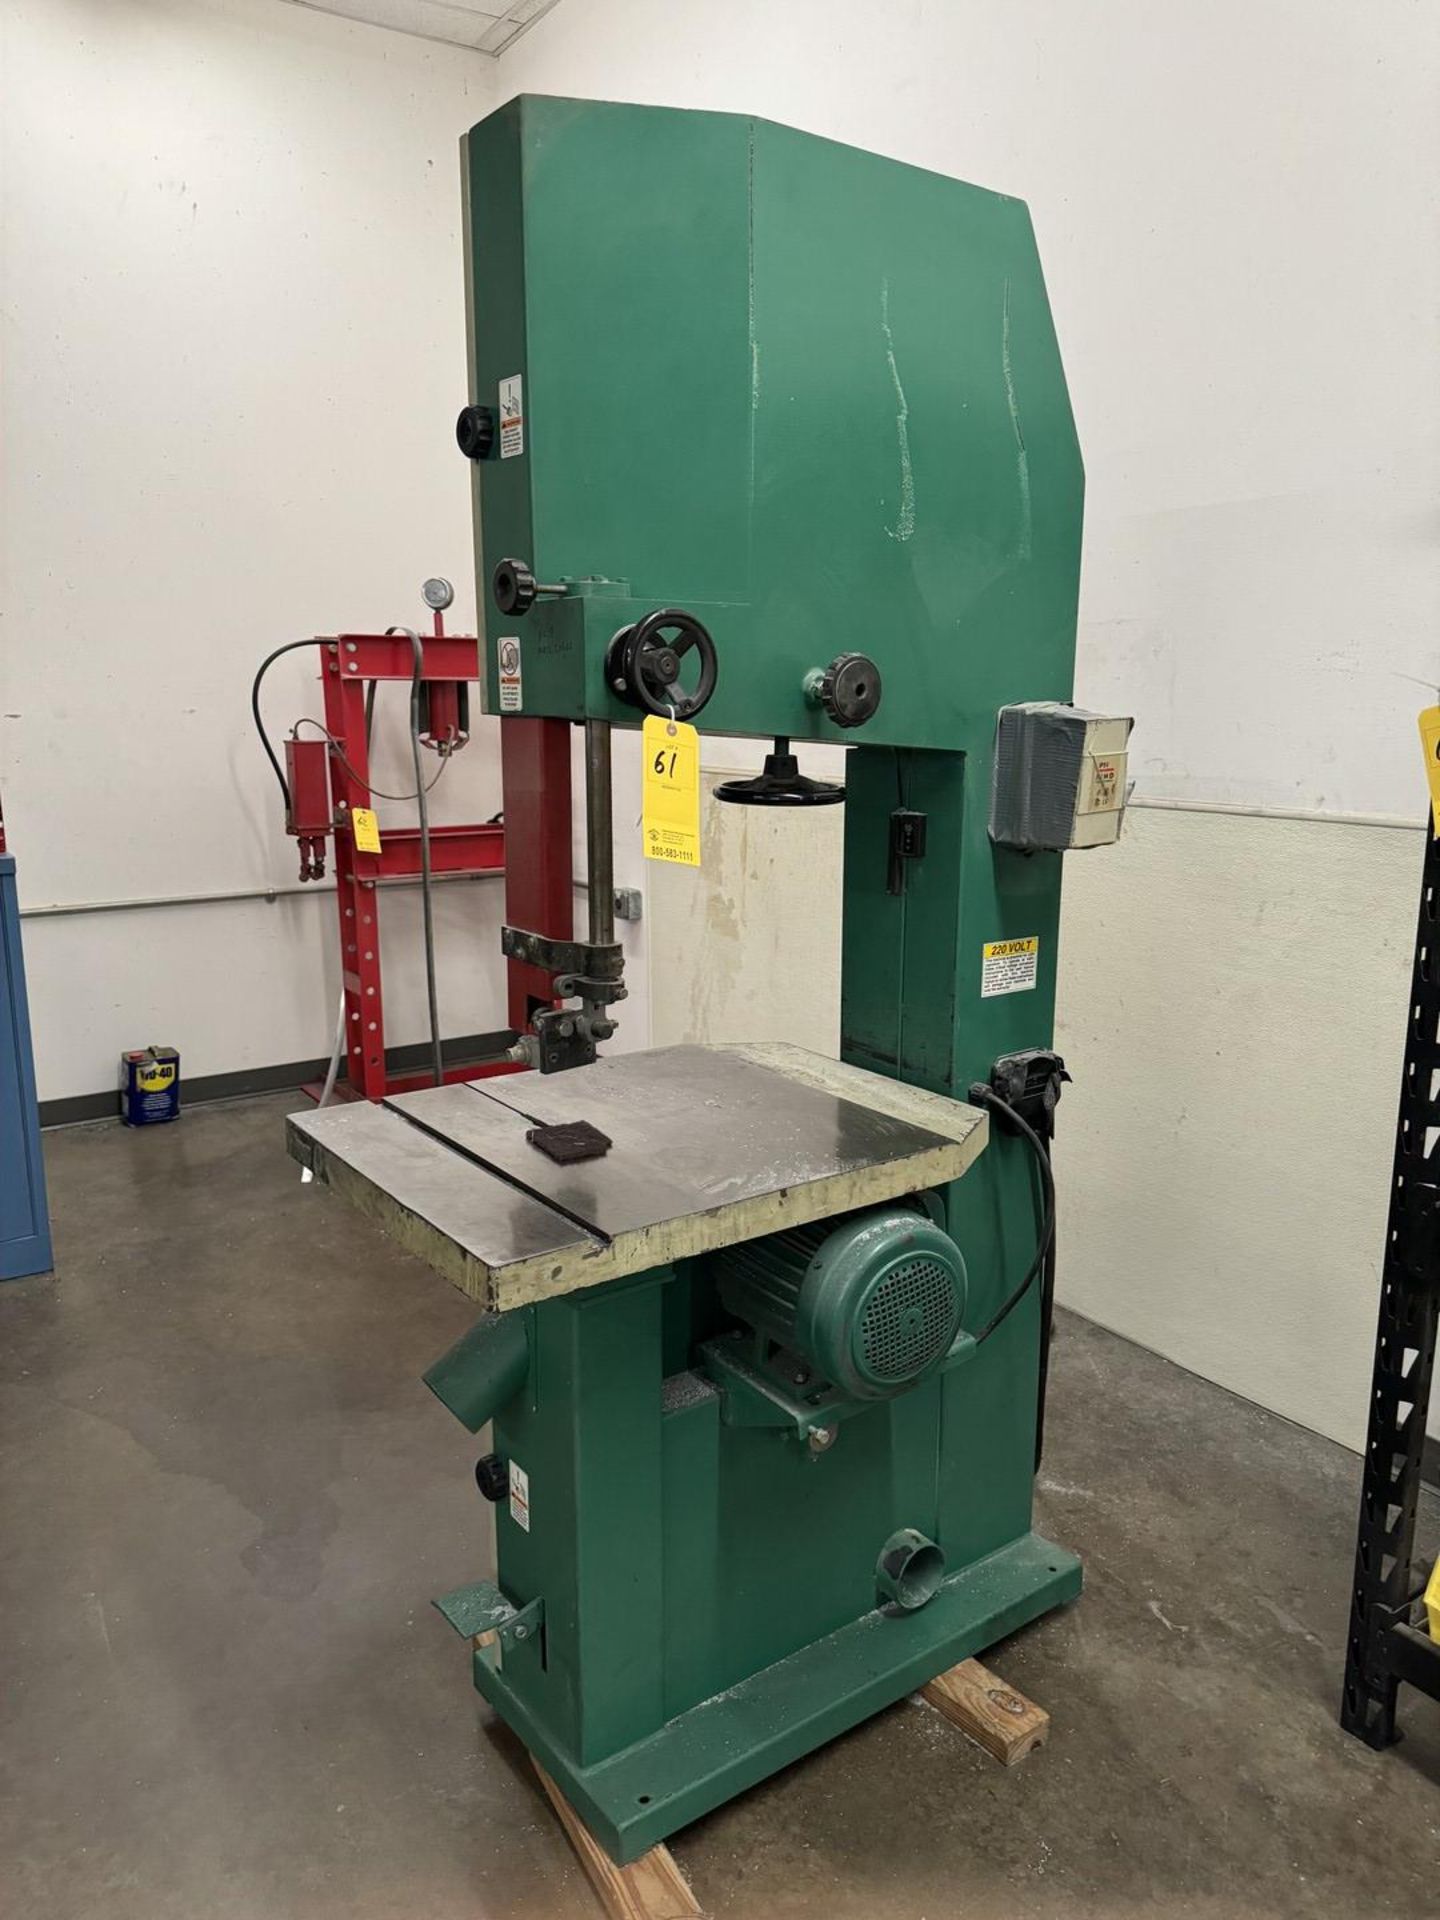 Grizzly Industrial G3620 24” Bandsaw